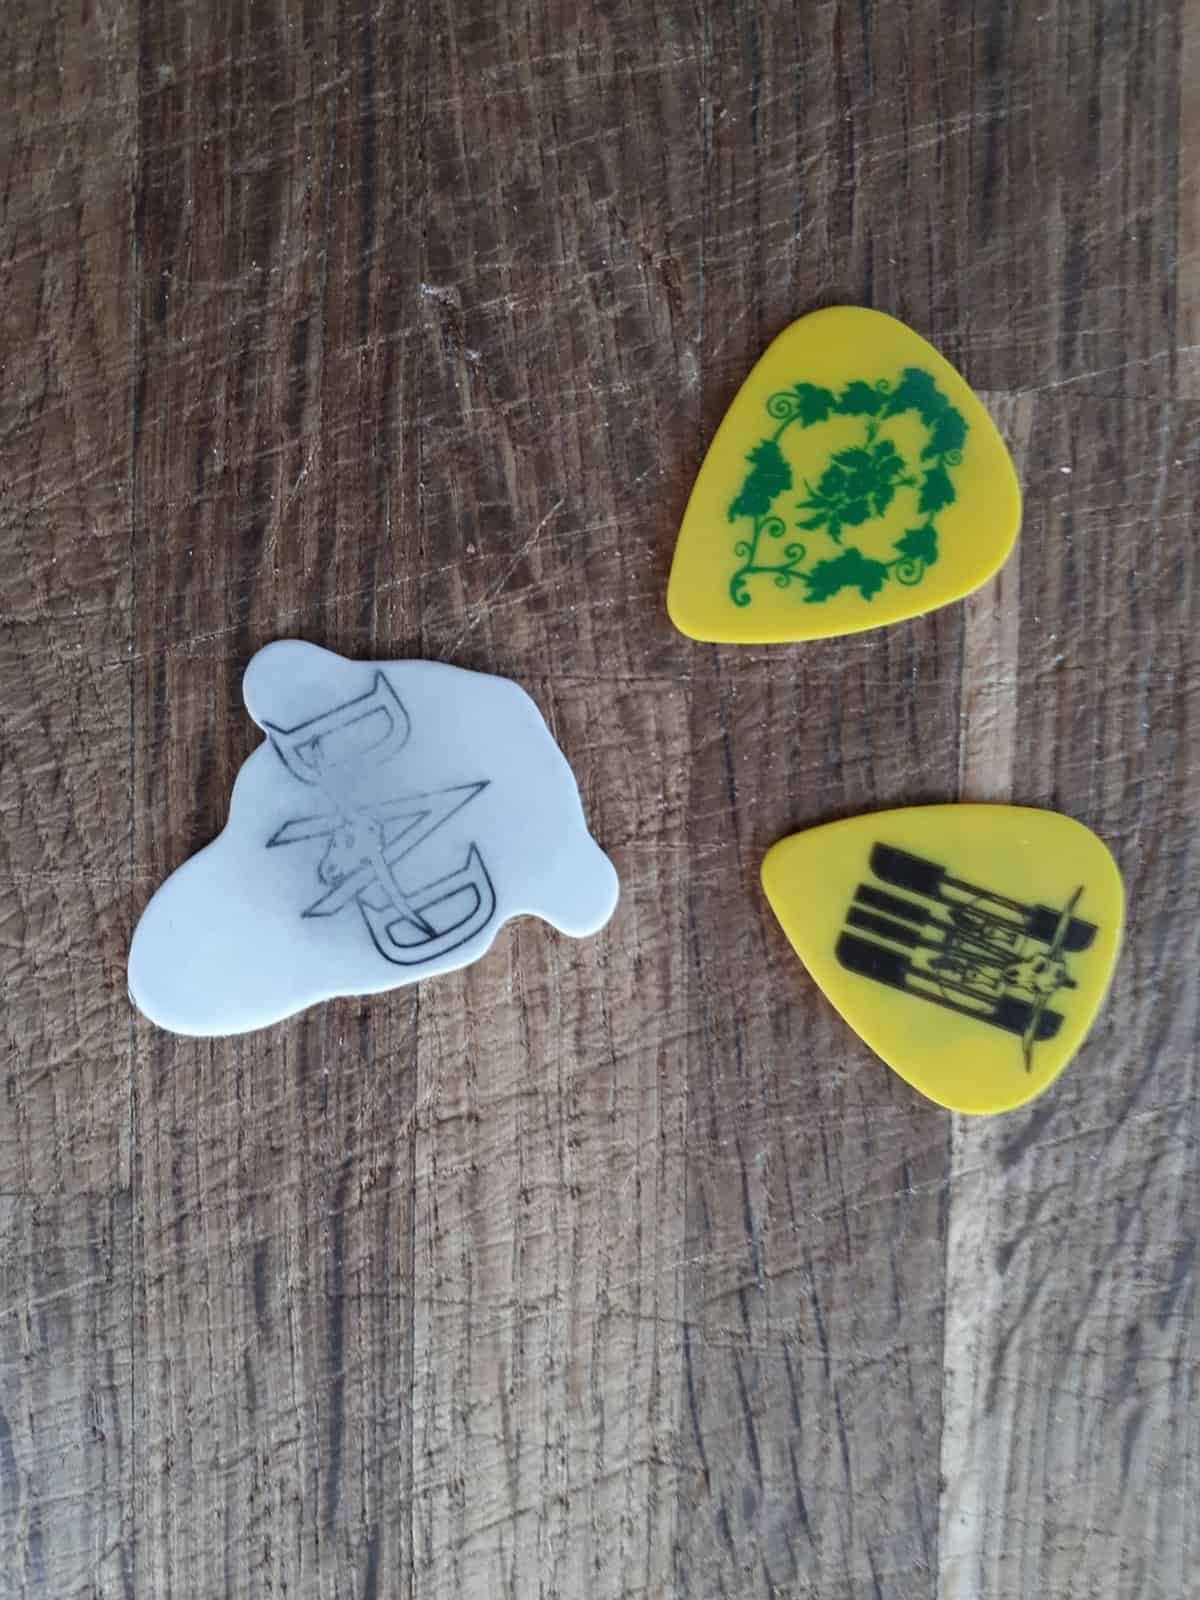 PLECTRUMS FROM RINGSTED KONGRESCENTER, MAY 23, 2019, BACK